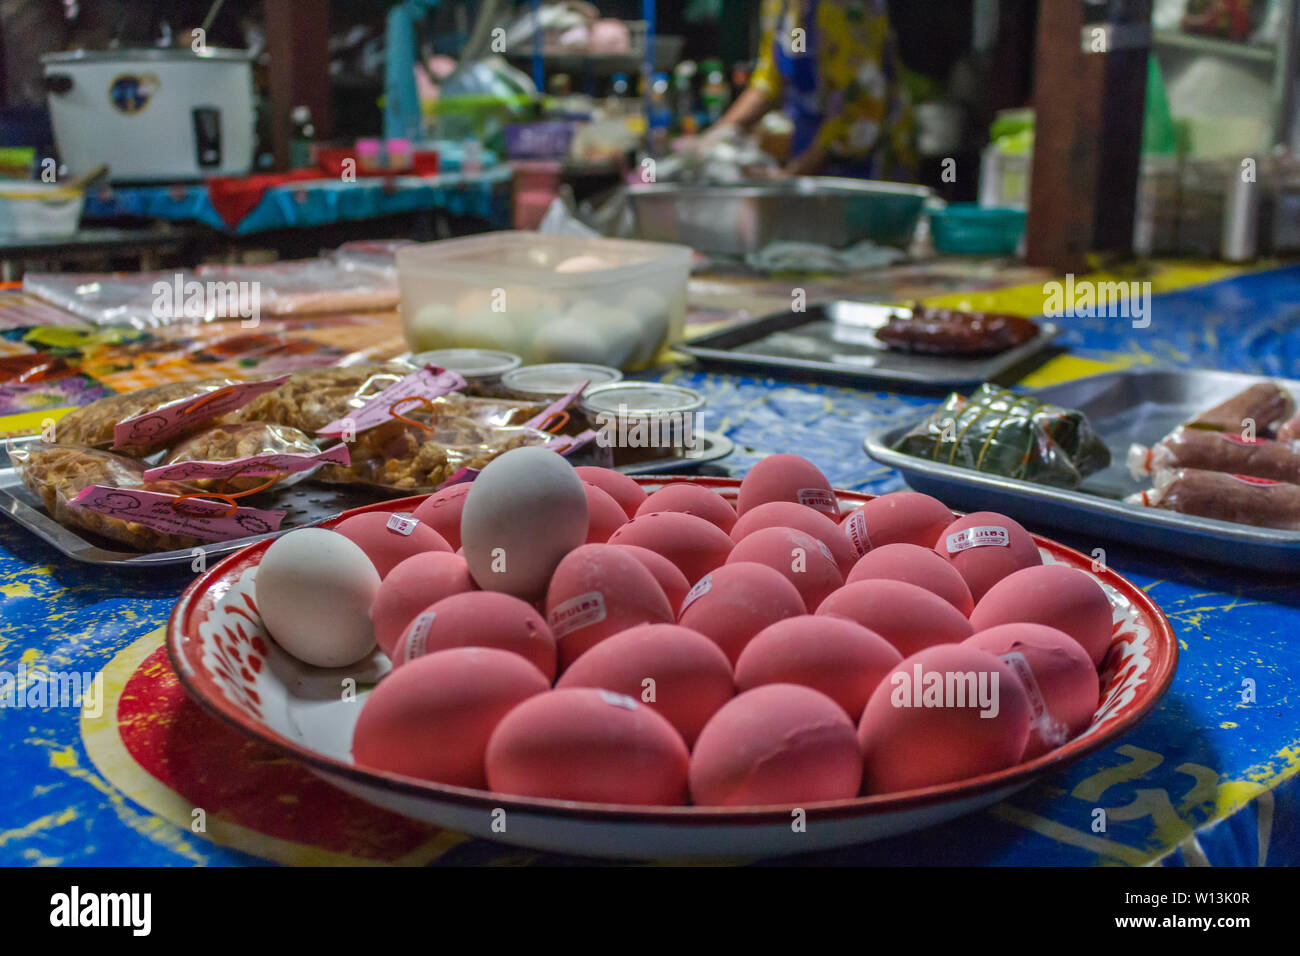 Pink eggs on sale on a street food stall in Bangkok, Thailand Stock Photo